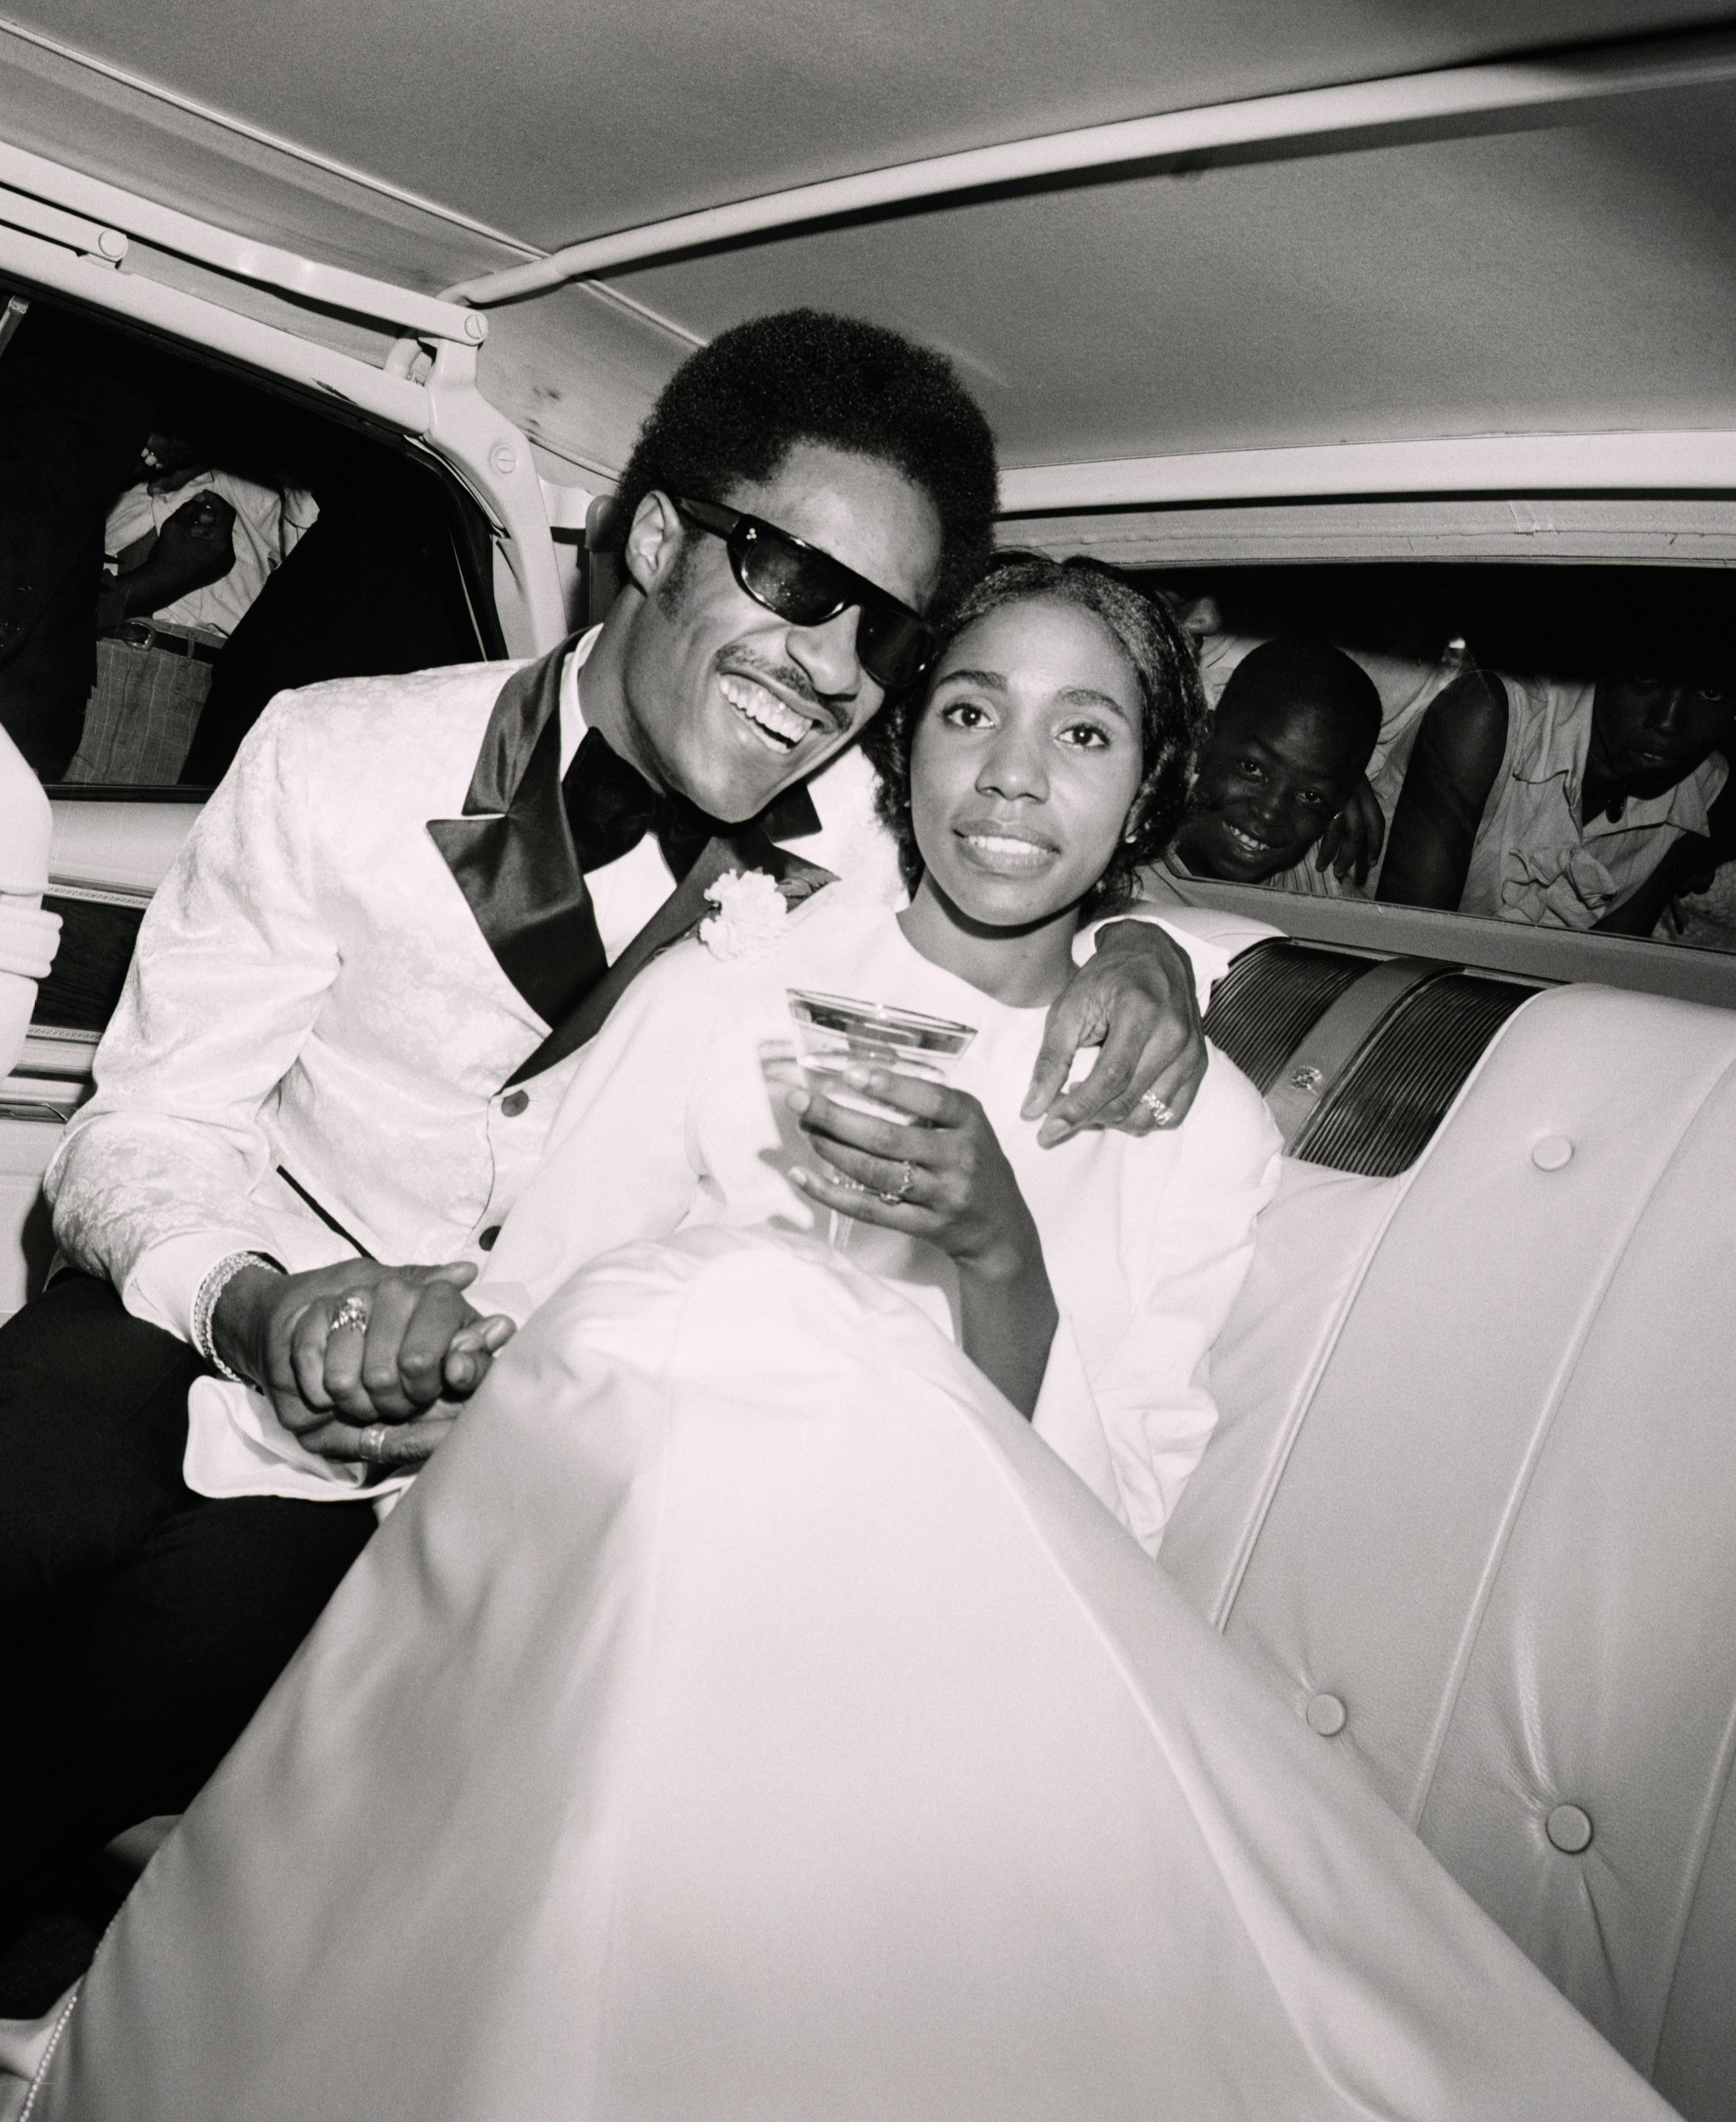 Stevie Wonder and Motown songwriter Syreeta Wright on their wedding day in 1970 | Source: Getty Images